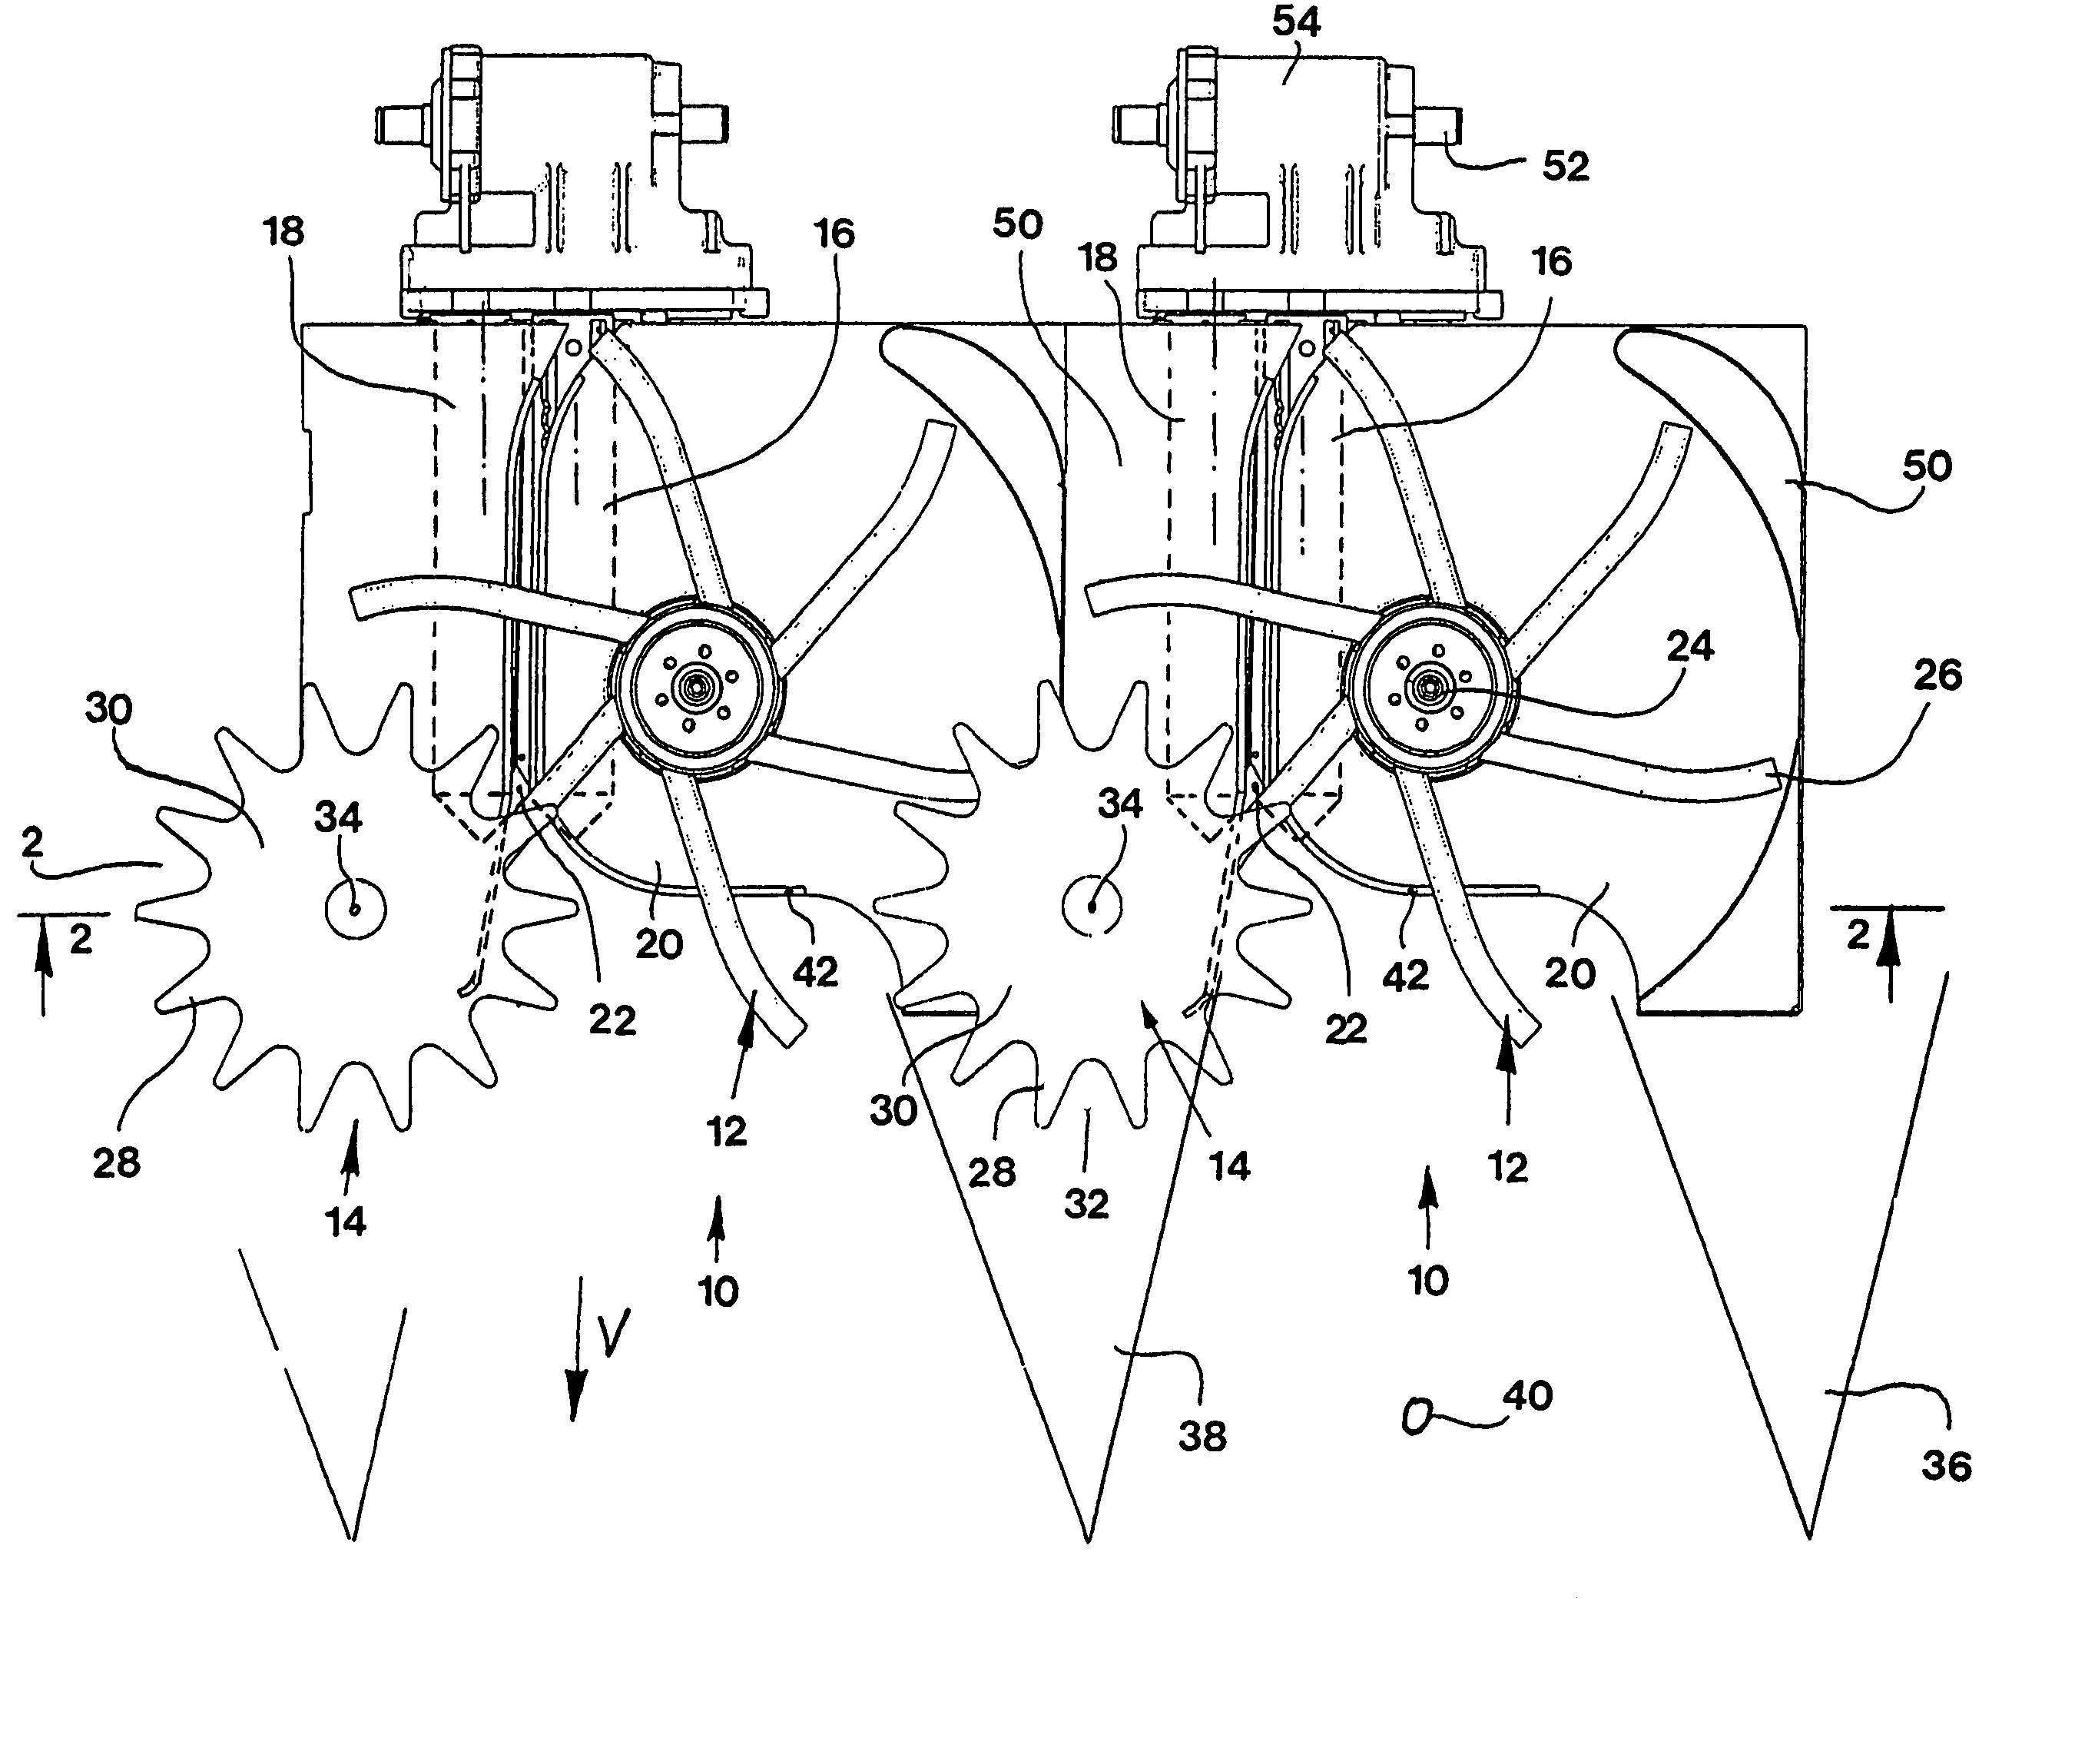 Gathering and picking device